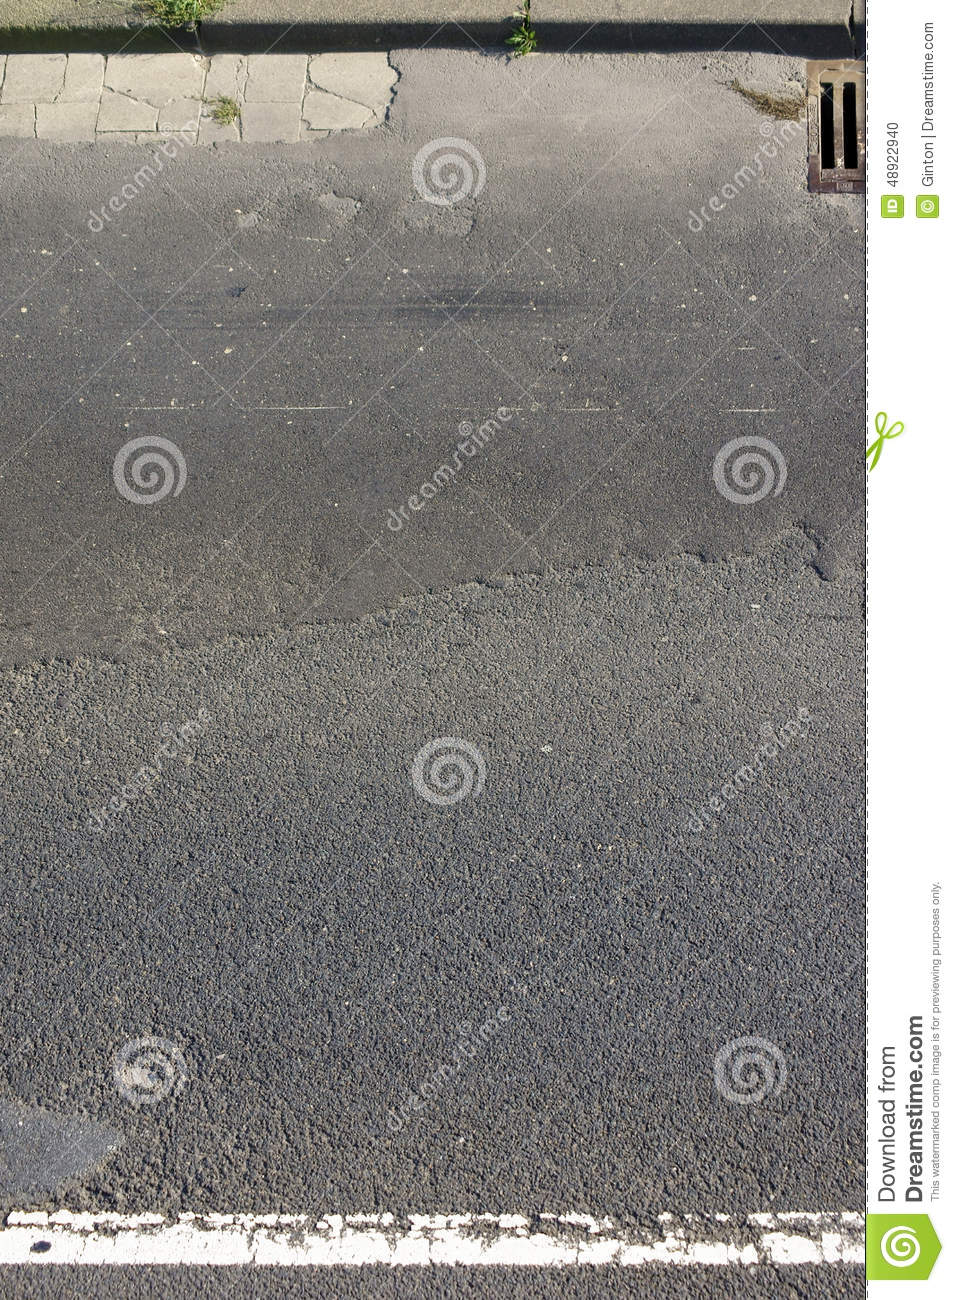 The Top View Of The Crumbling Asphalt Of A Highway With A Gully 